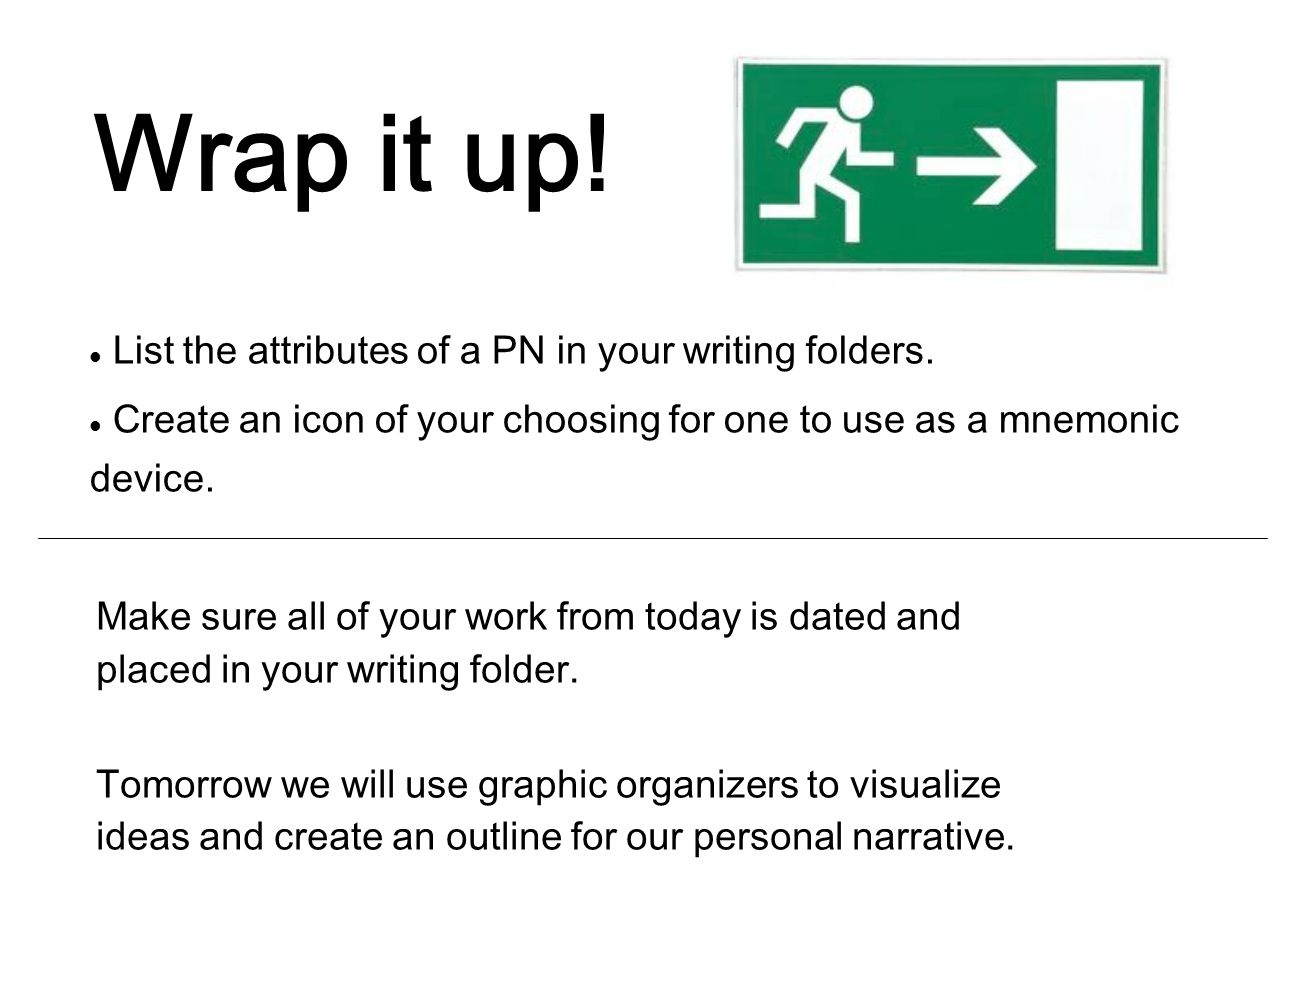 List the attributes of a PN in your writing folders.